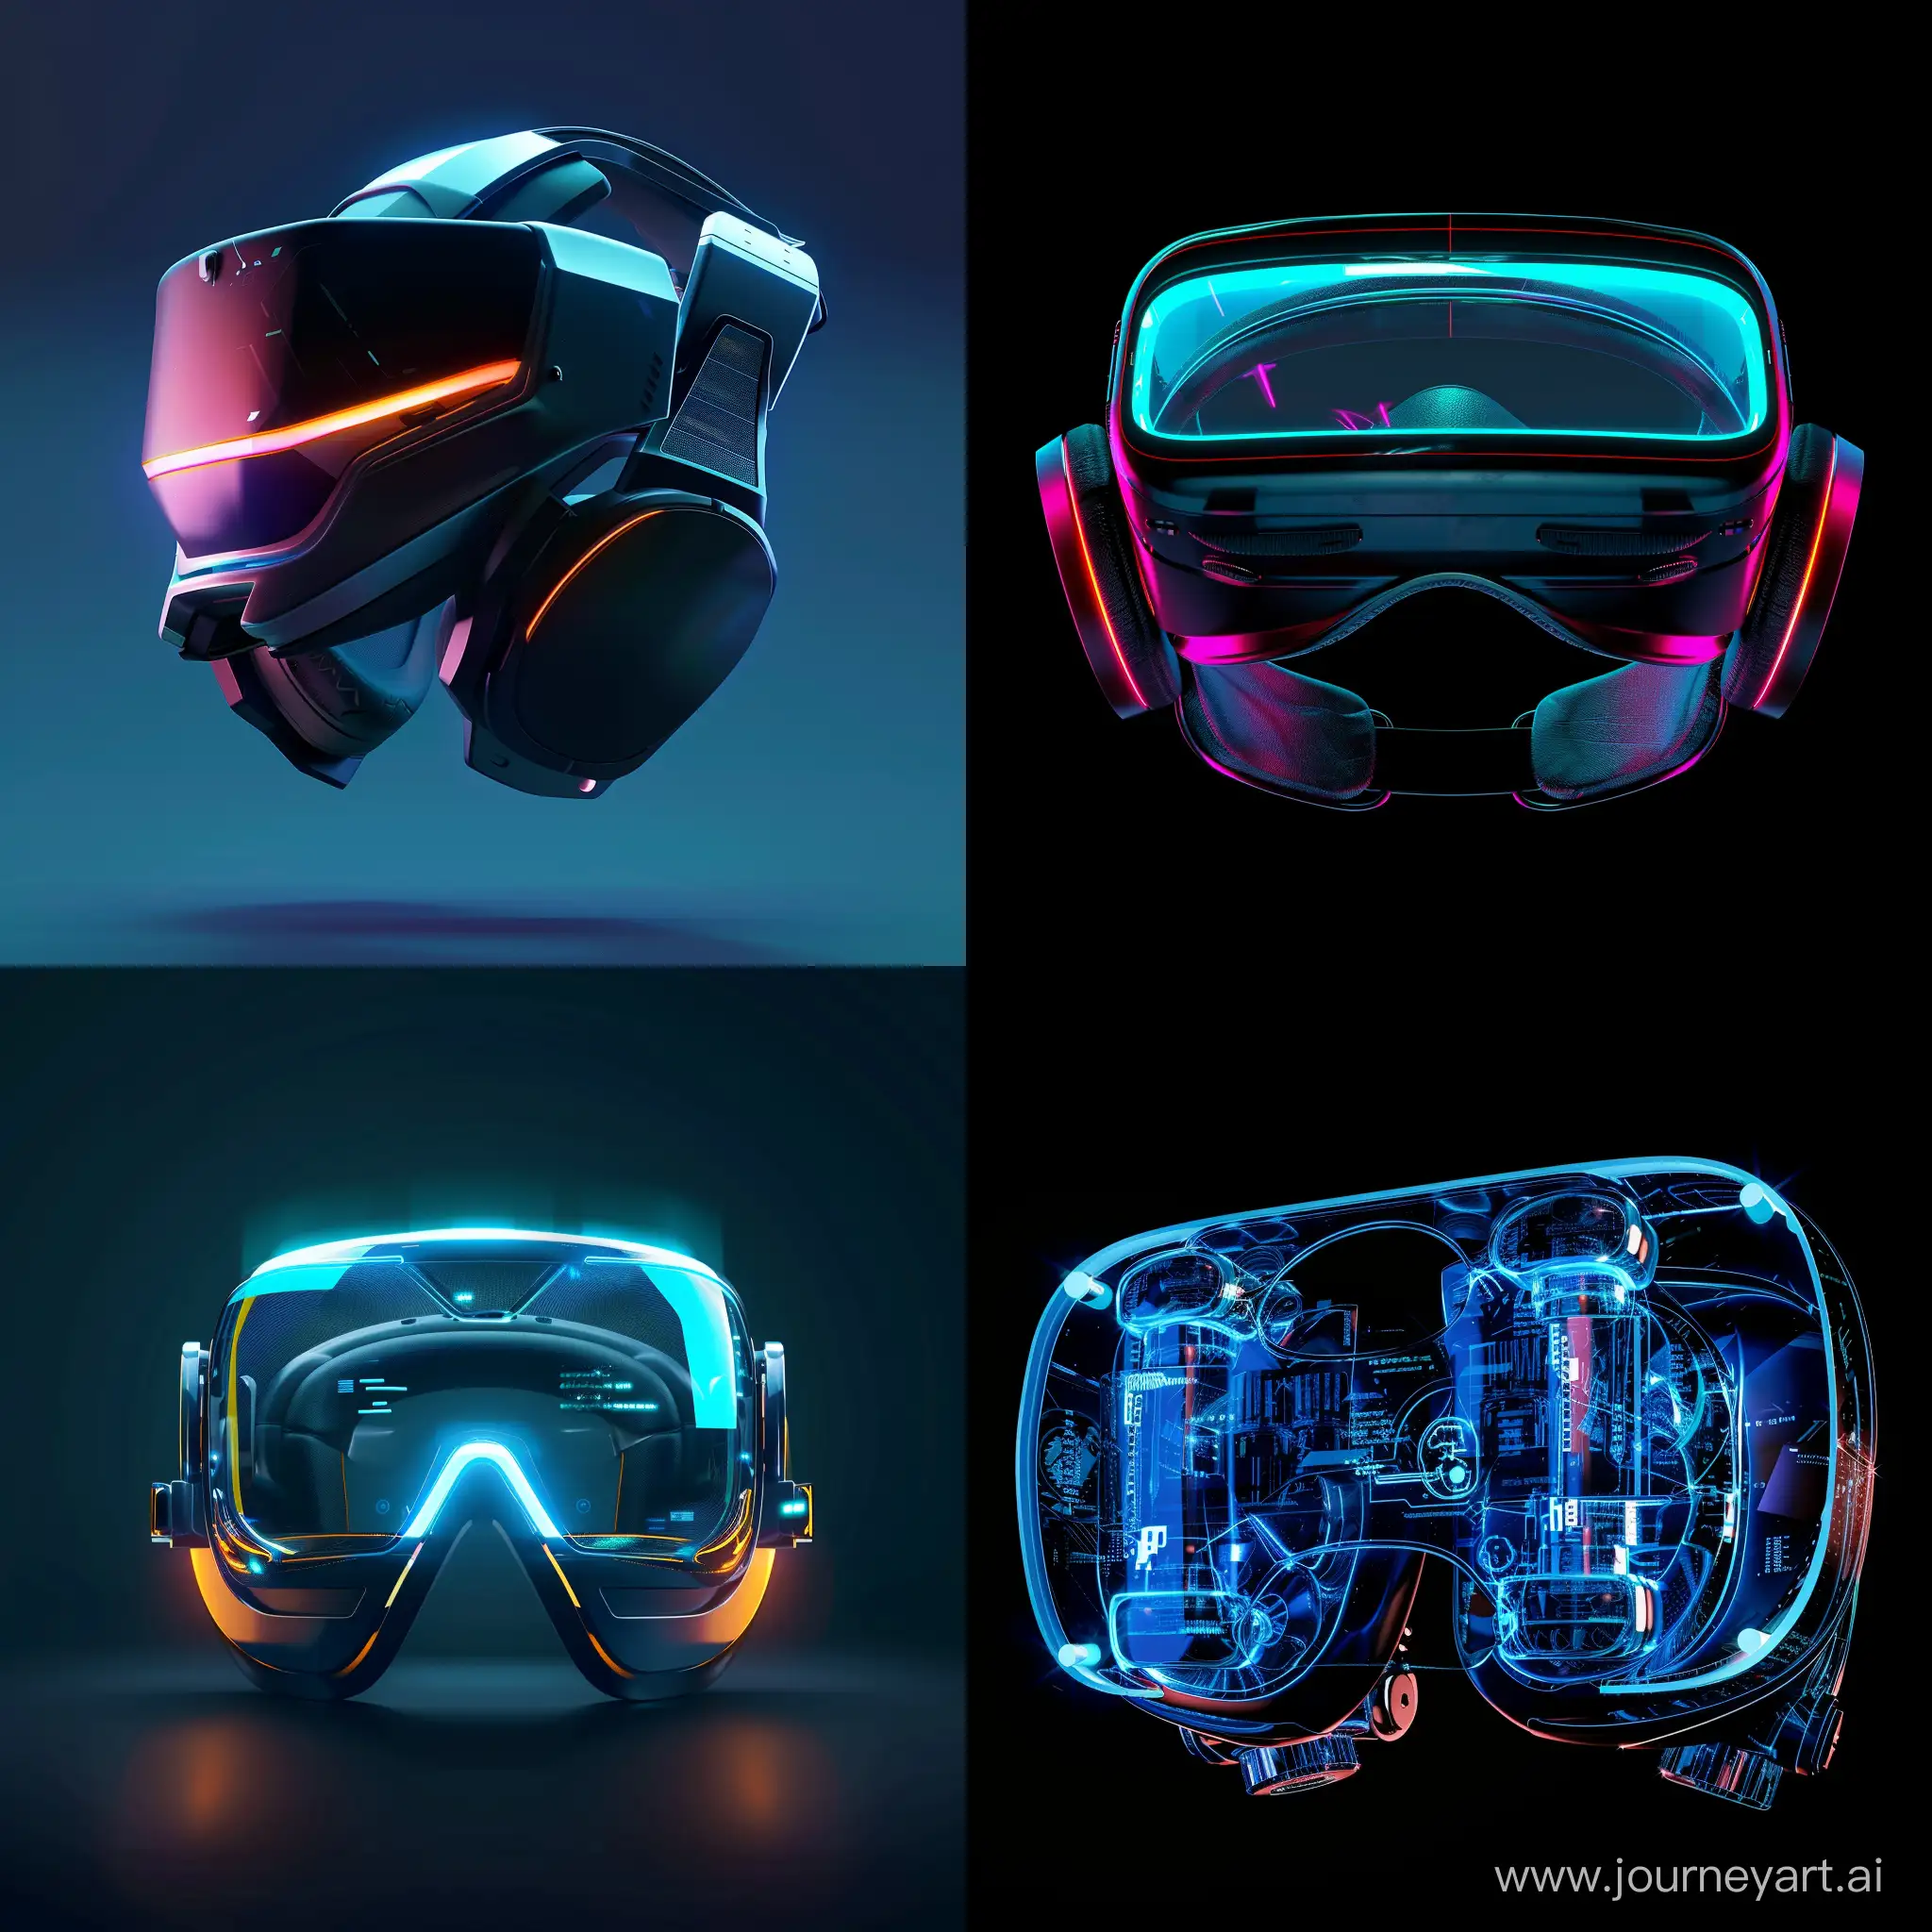 A futuristic cyberpunk theme VR headset product image, solid background.